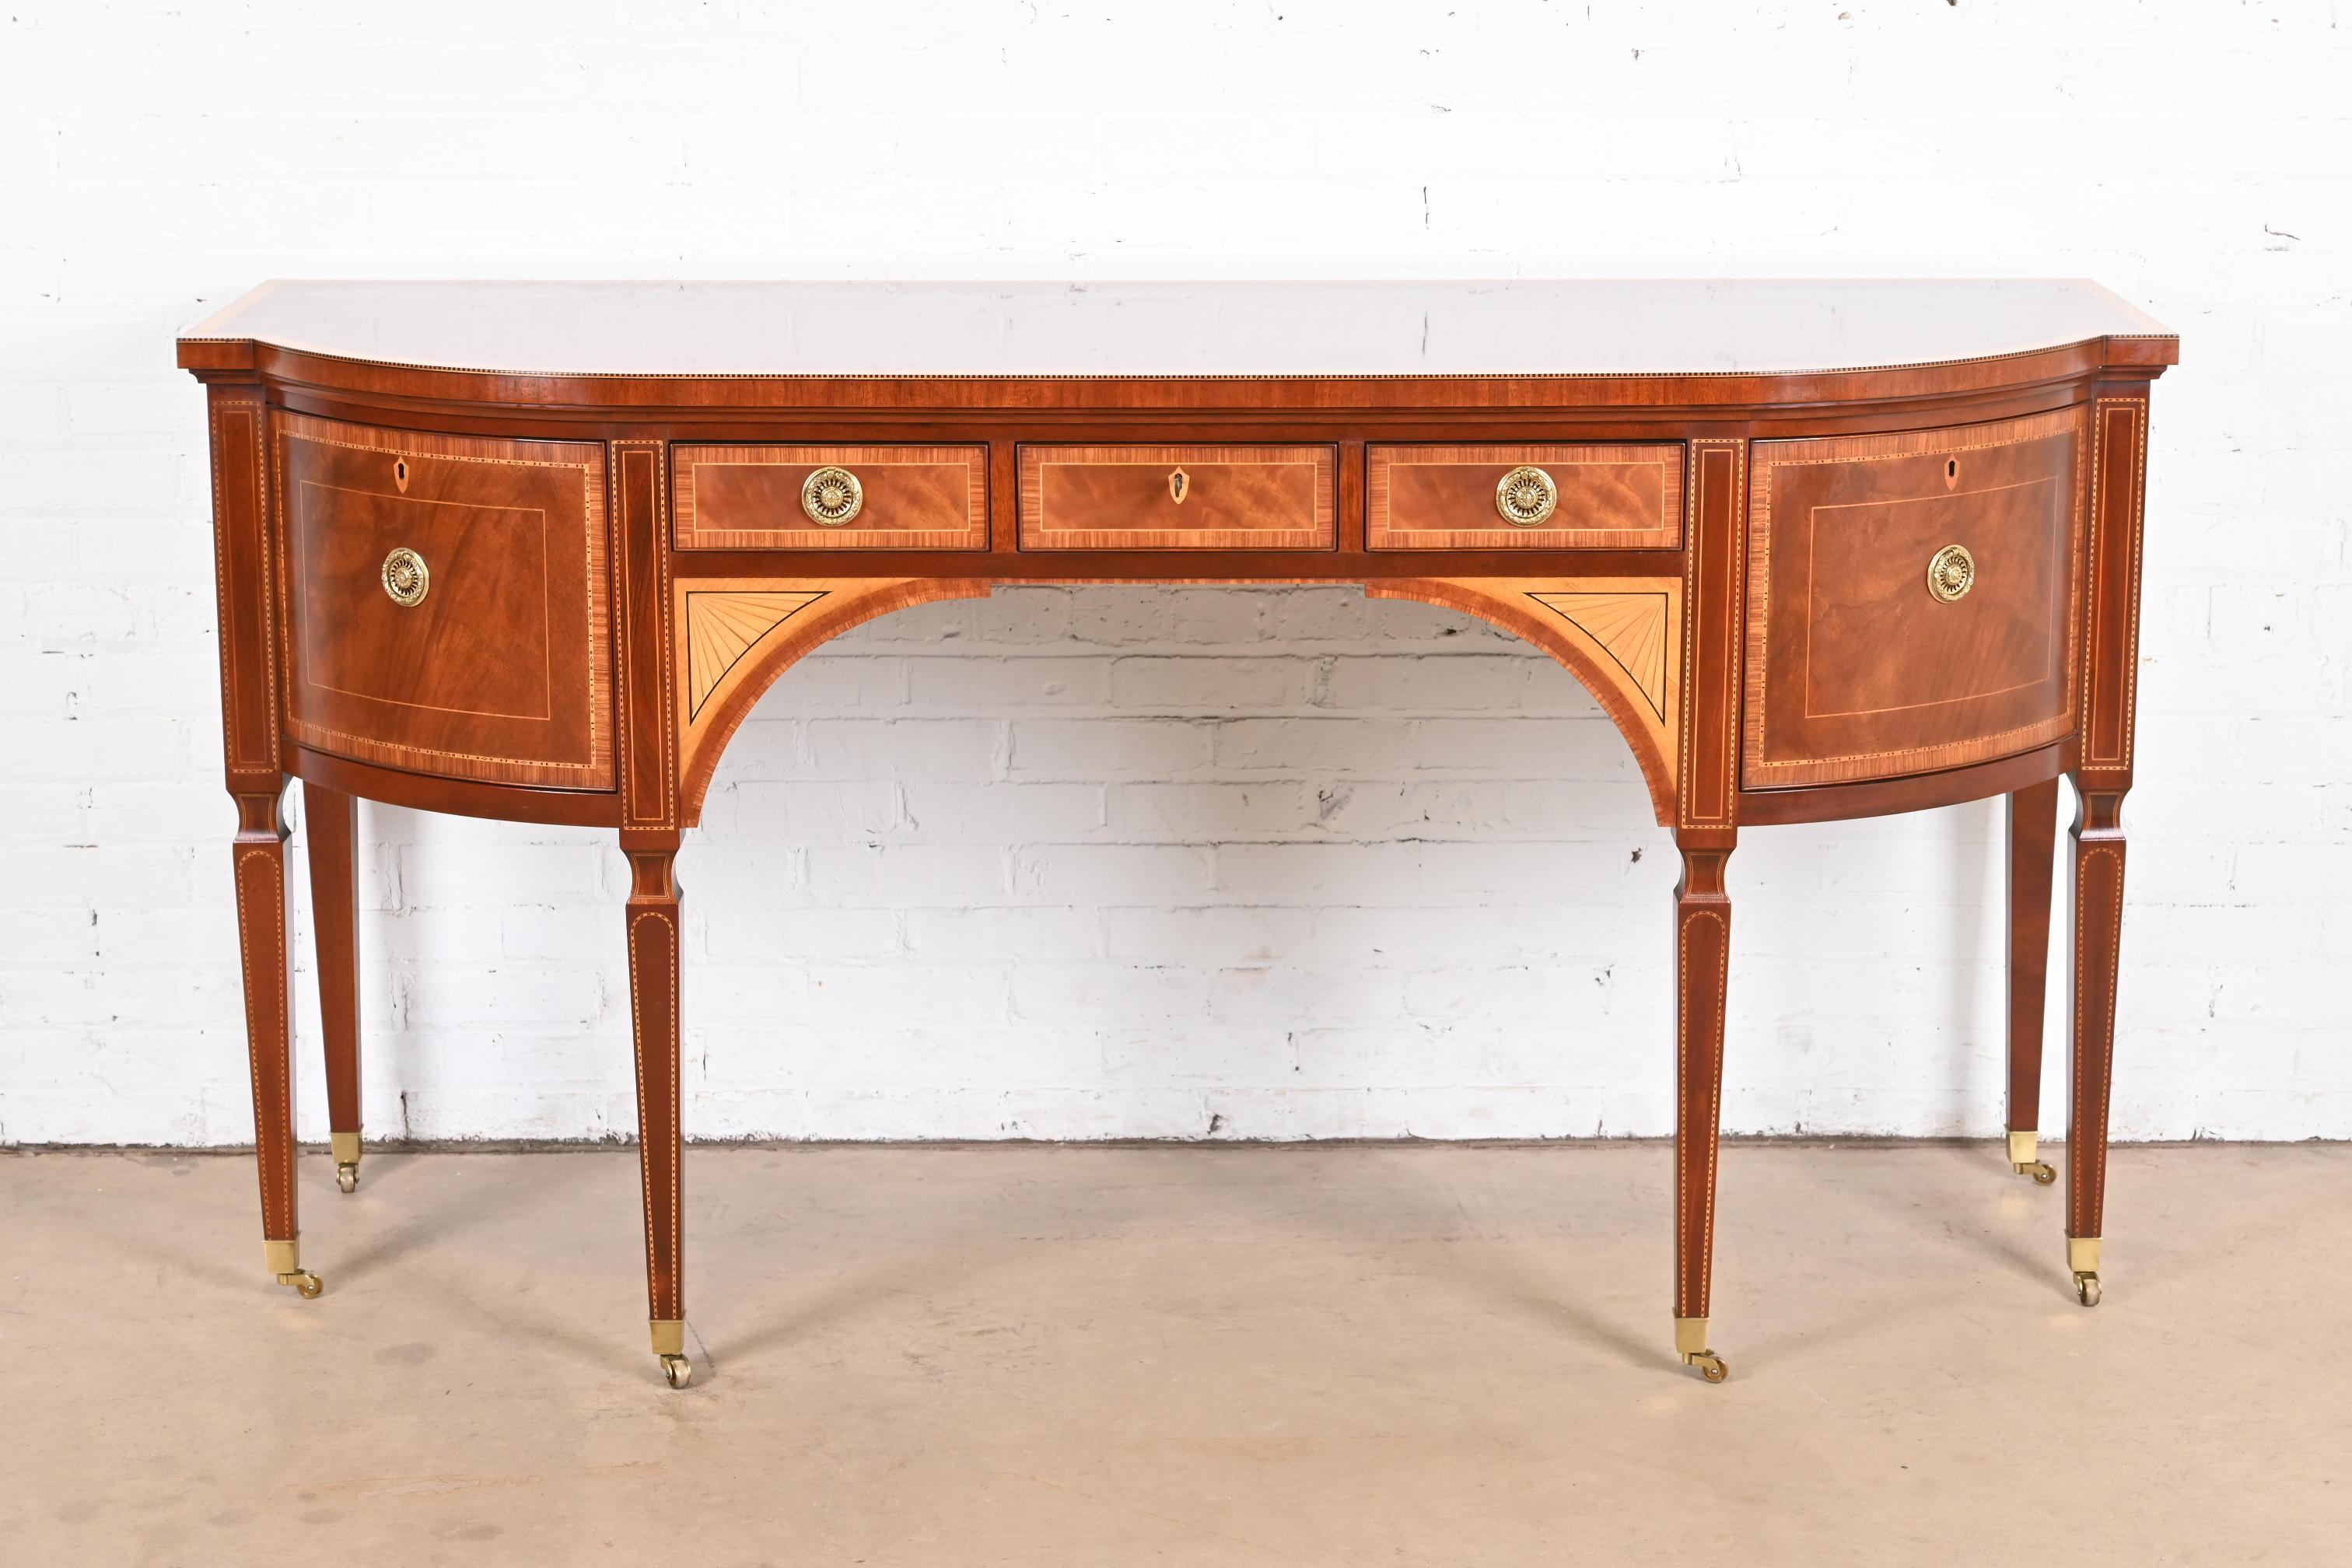 A rare and exceptional Sheraton or Hepplewhite style bow front sideboard or credenza

From the exclusive Stately Homes Collection by Baker Furniture

USA, Circa 1980s

Gorgeous flame mahogany, with satinwood inlay, original brass hardware, and